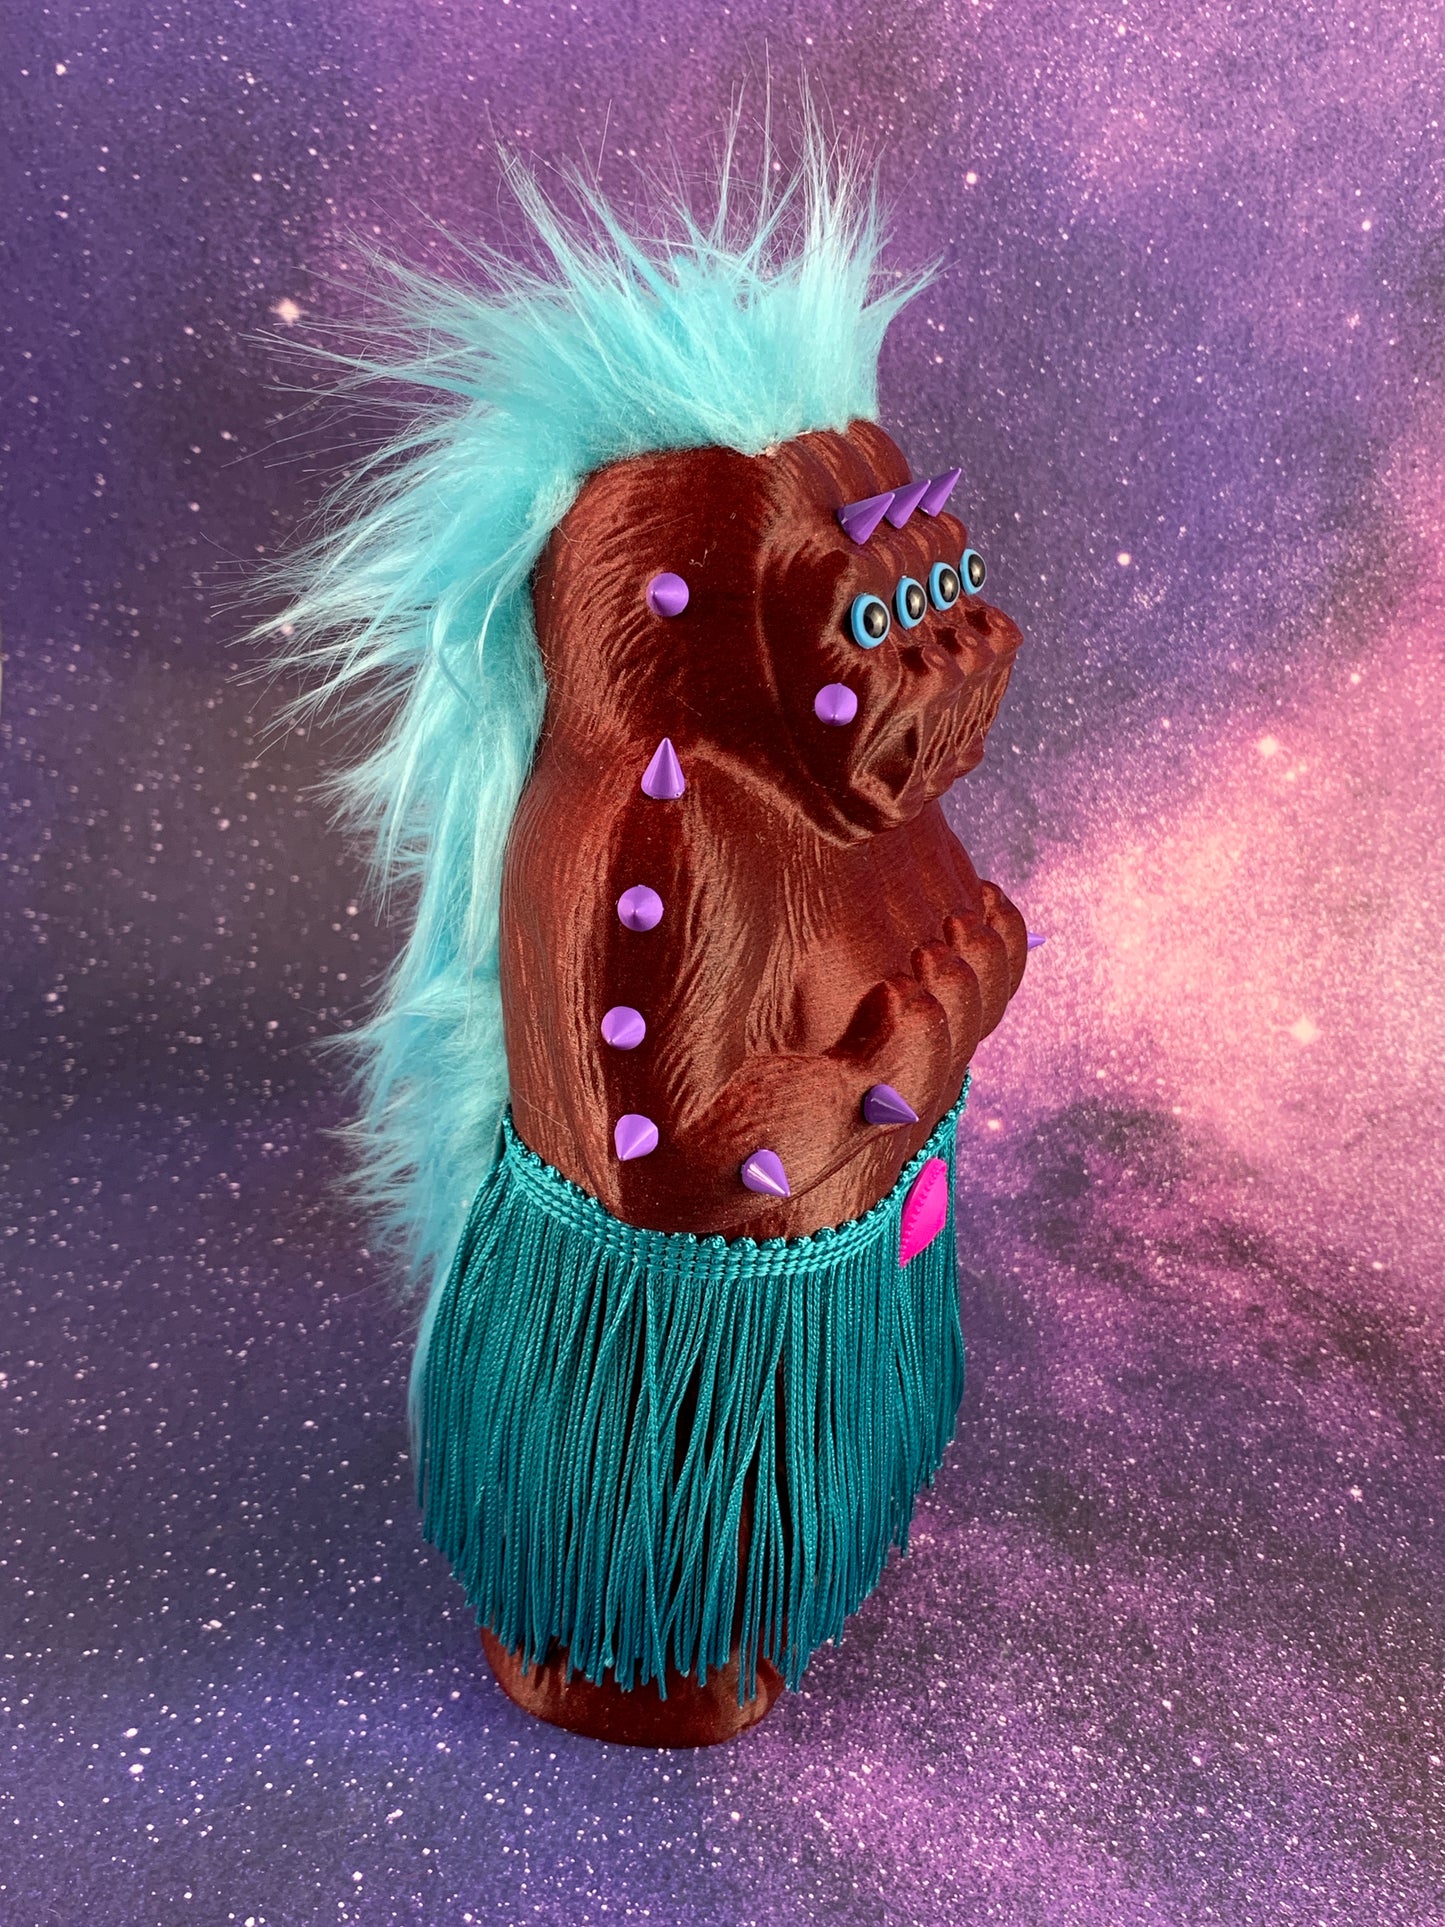 Royal Freak of Nature Ape From Beyond the Planets